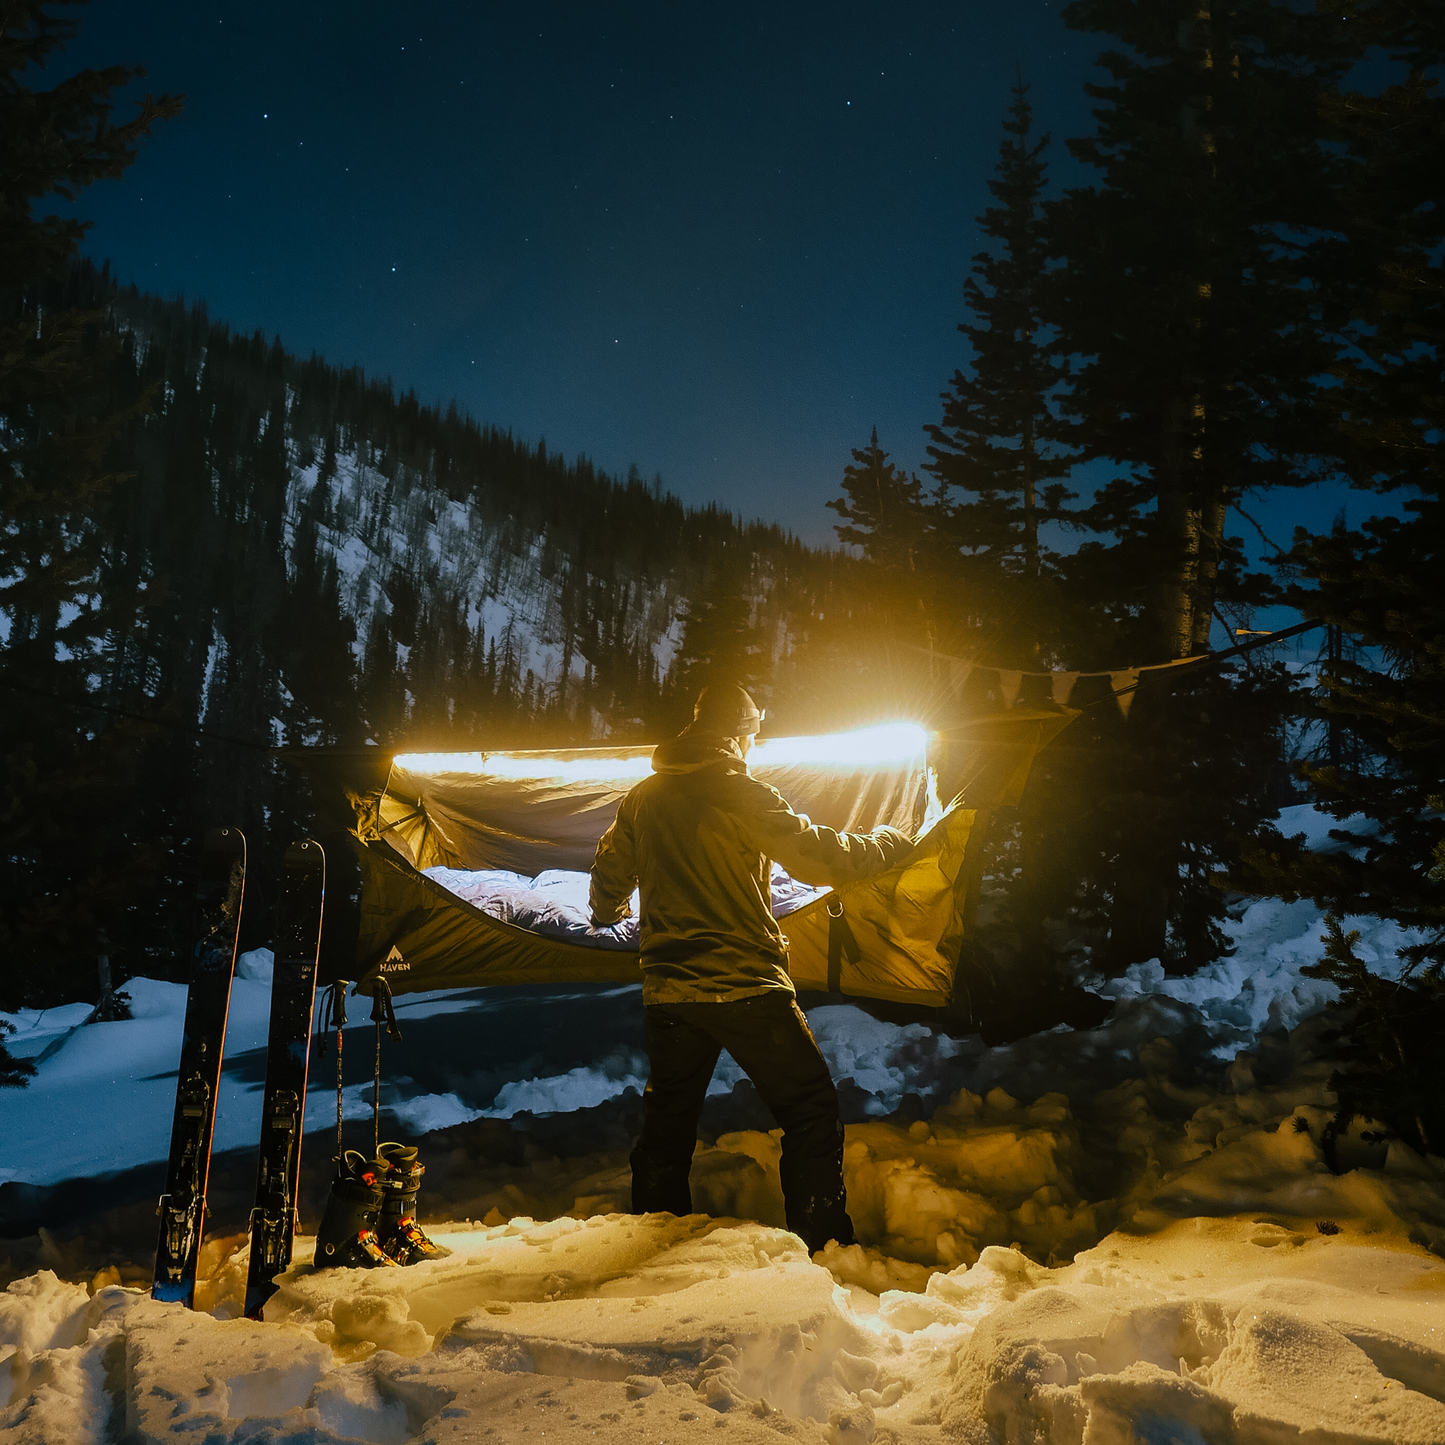 Nighttime winter camping in a hammock tent with glowing light